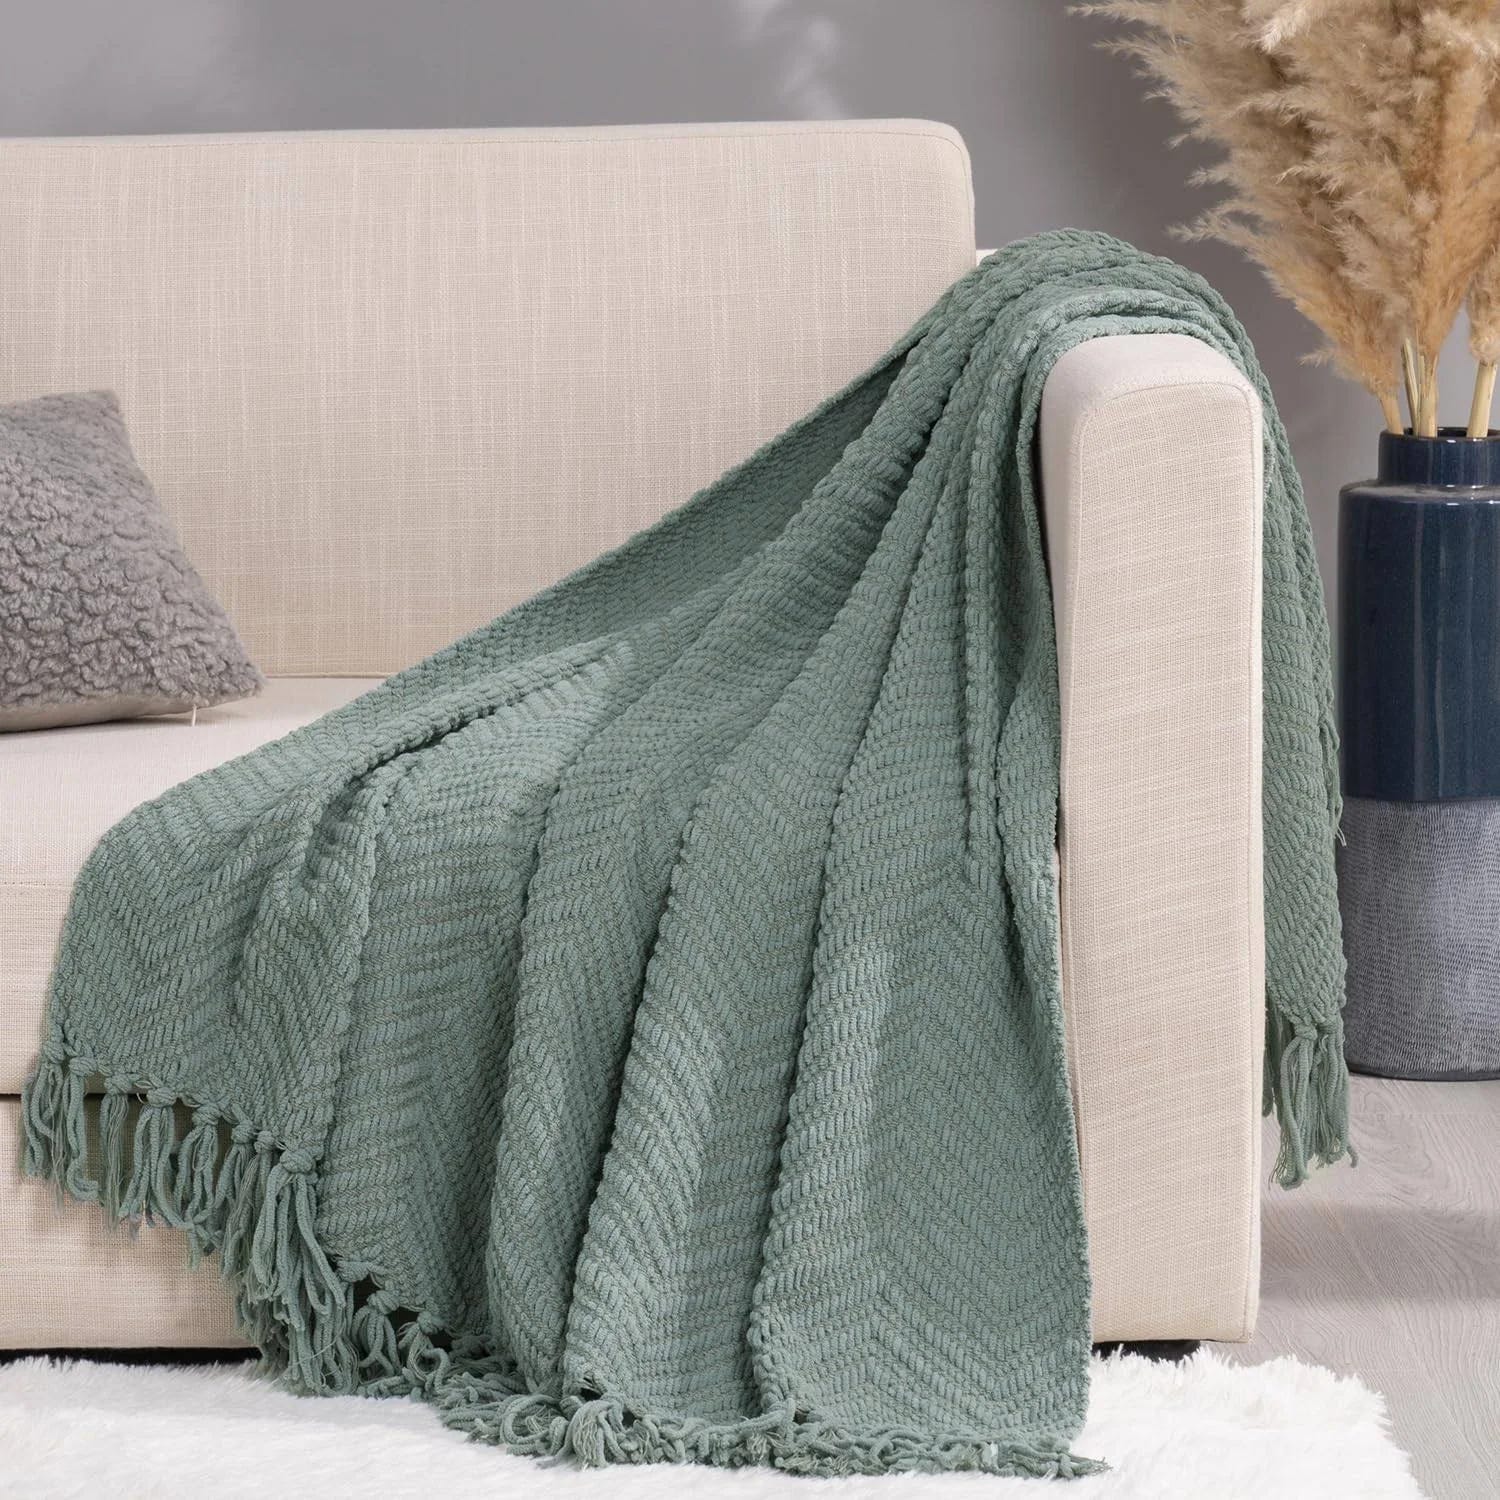 Soft & Versatile Boho Chenille Knit Throw Blanket for Cozy Couch and Bed | Image